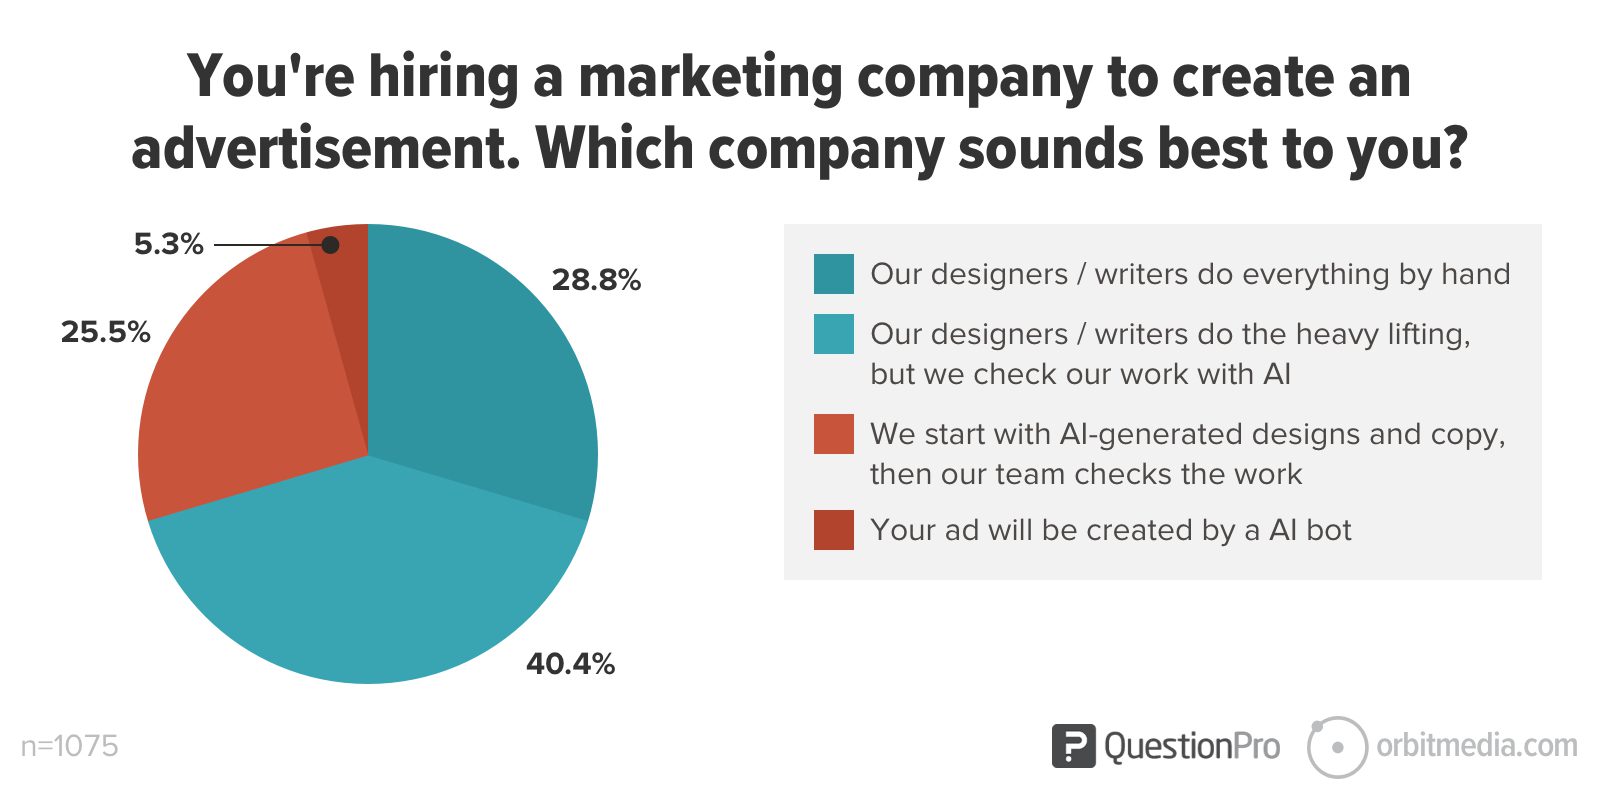 pie chart showing 70% of respondents want their creative agency to get help from AI. 